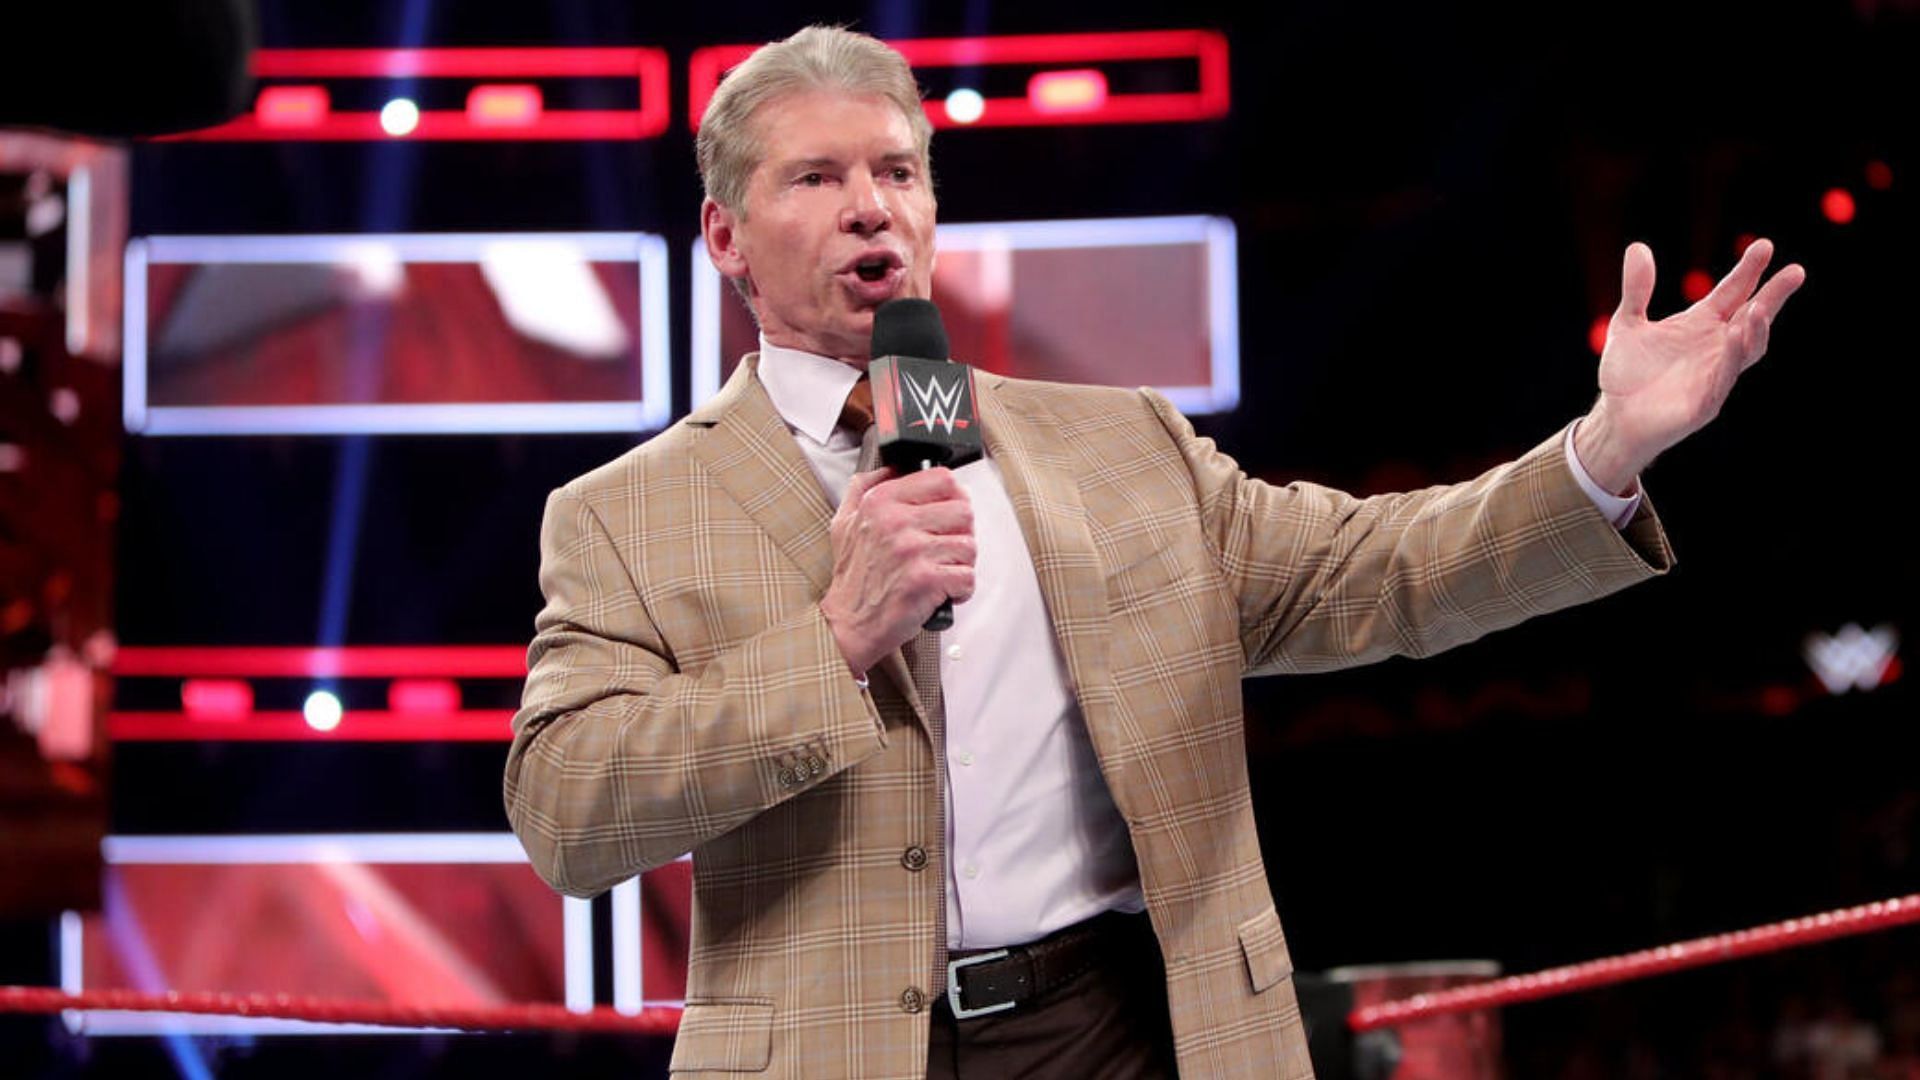 Vince McMahon, the former CEO and chairman of WWE